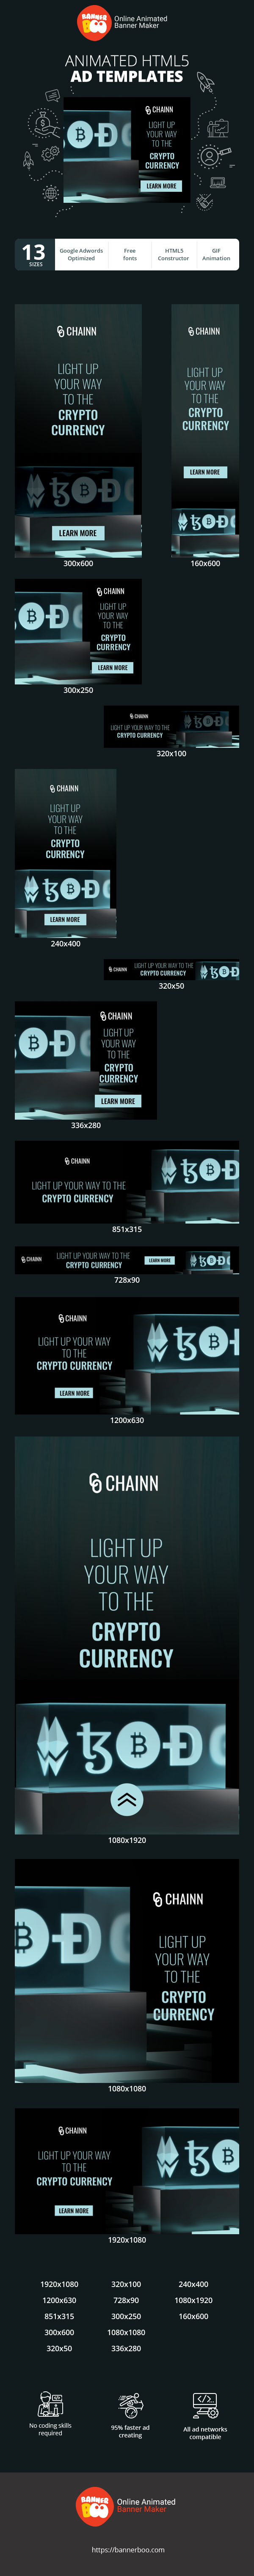 Banner ad template — Light Up Your Way To The Cryptocurrency — Cryptocurrency